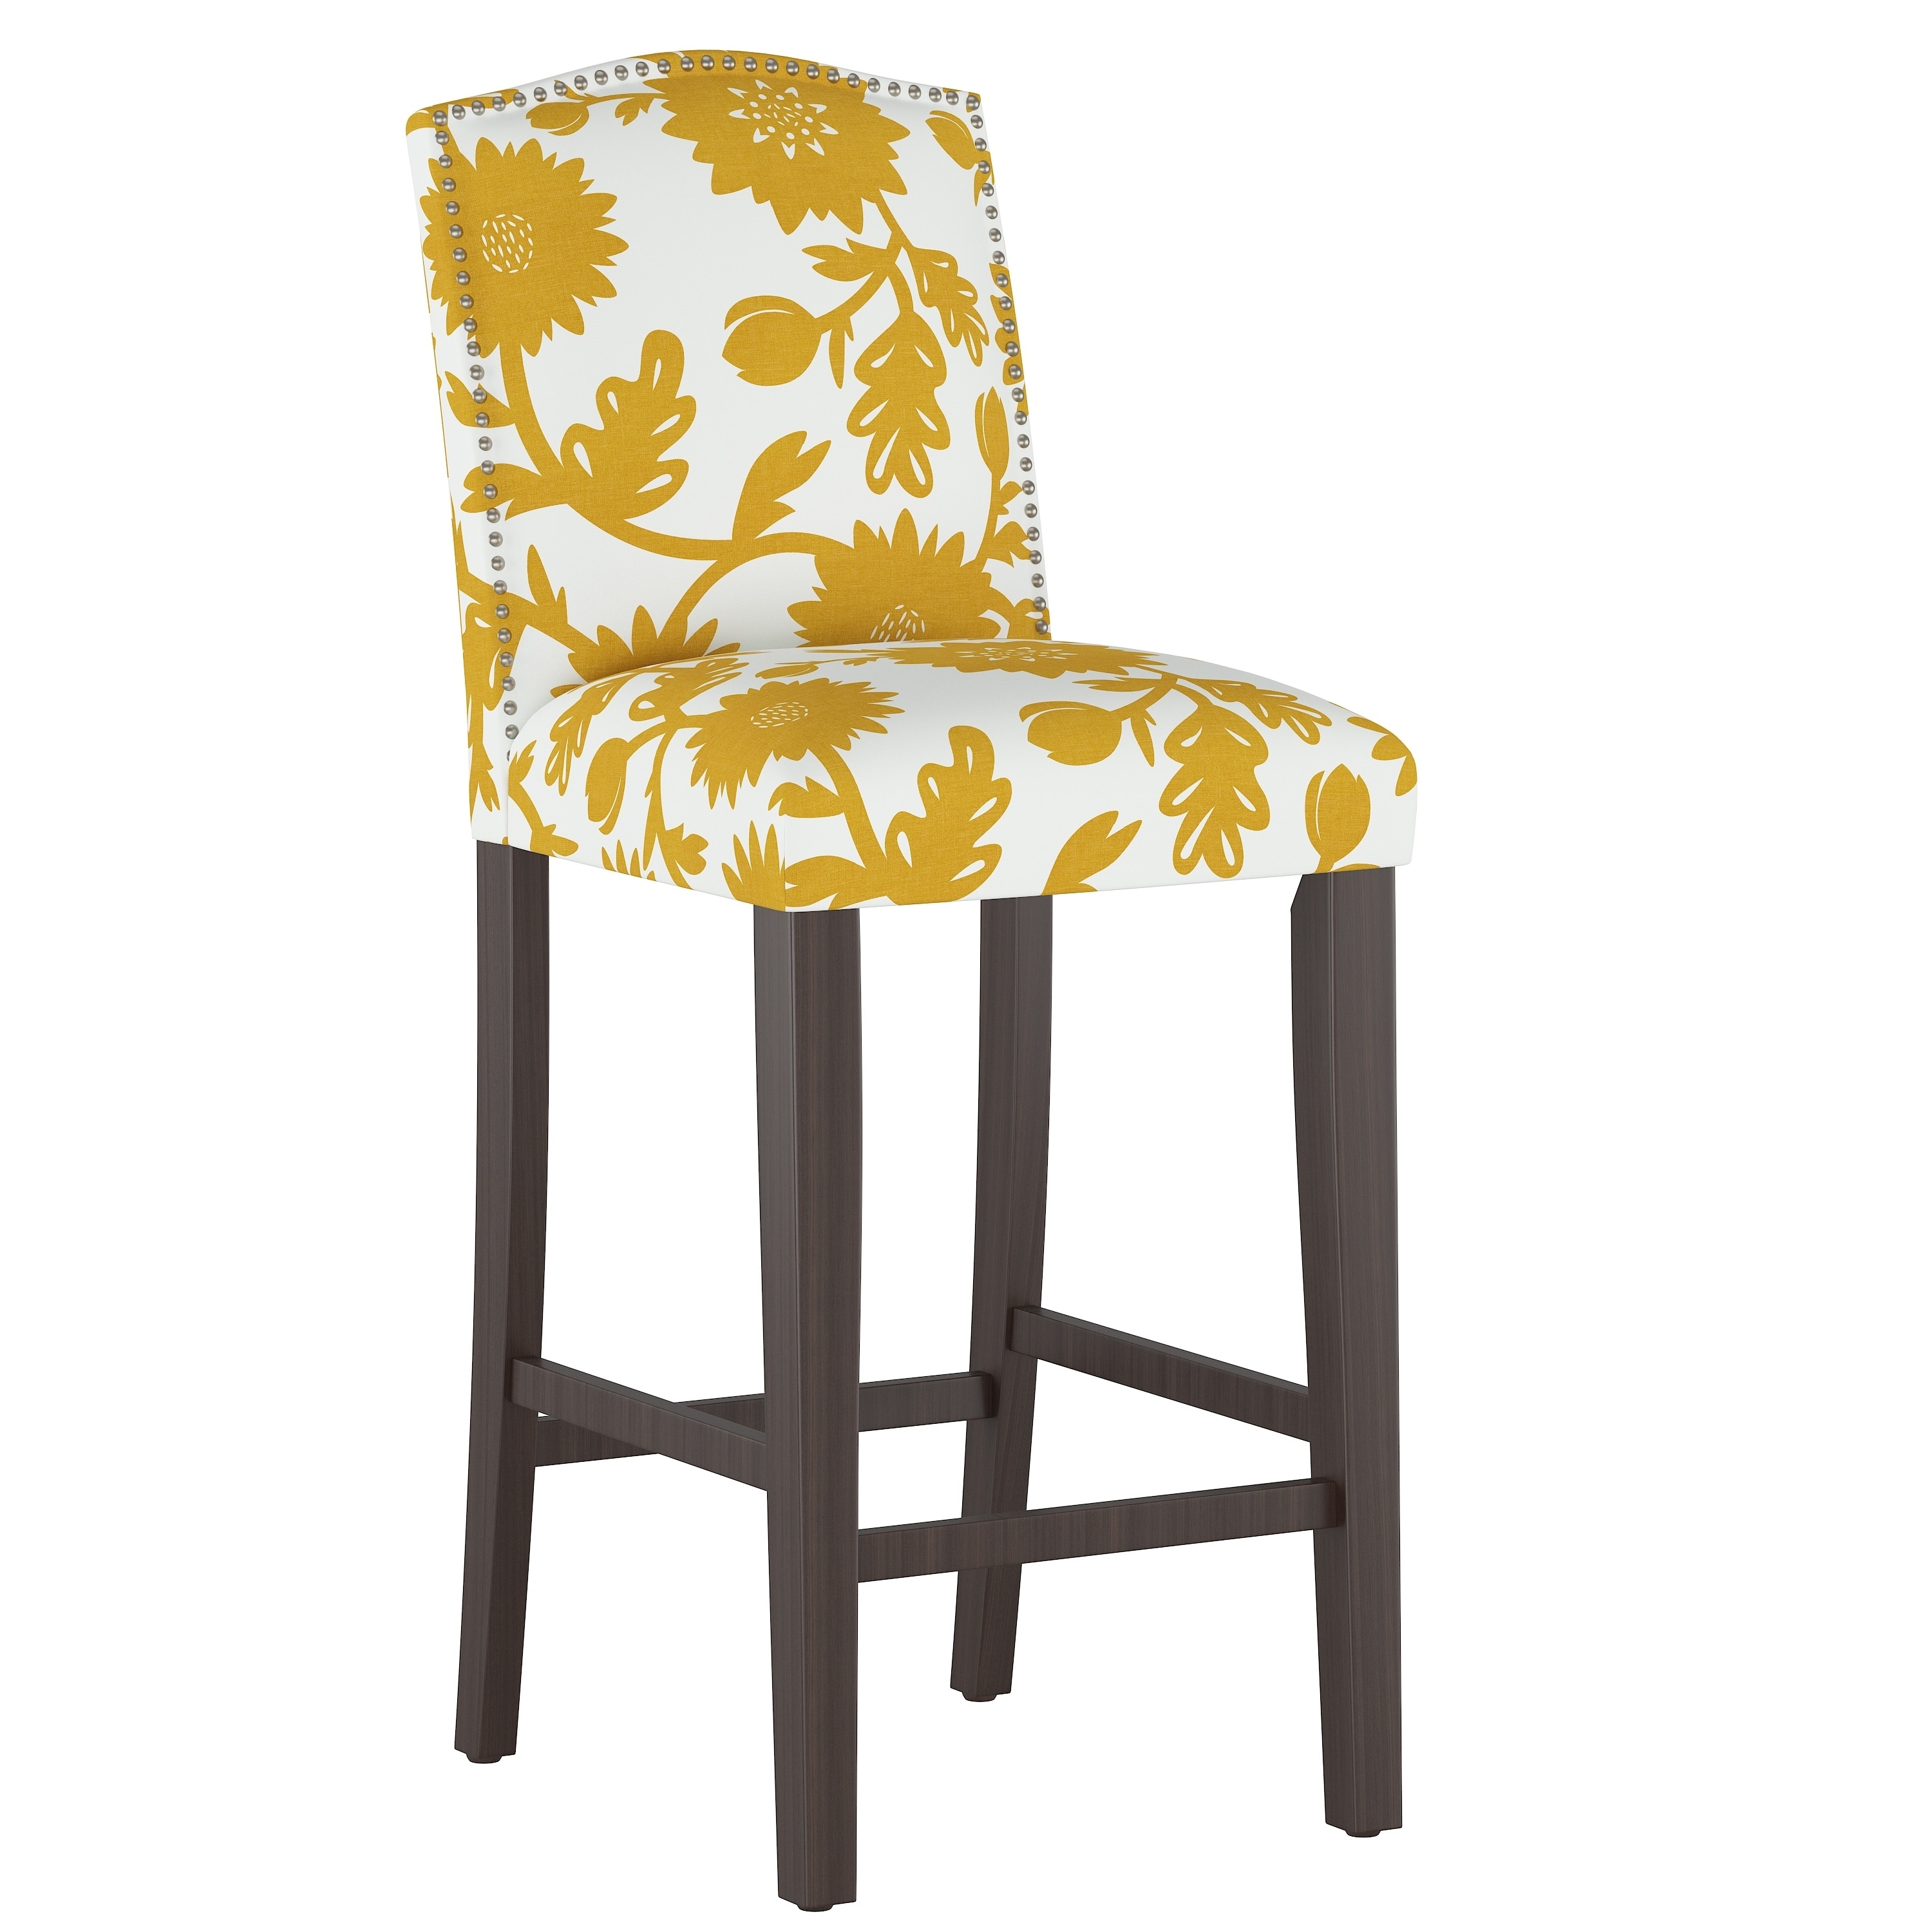 Amazing Button Back Bar Stool in the world Check it out now 